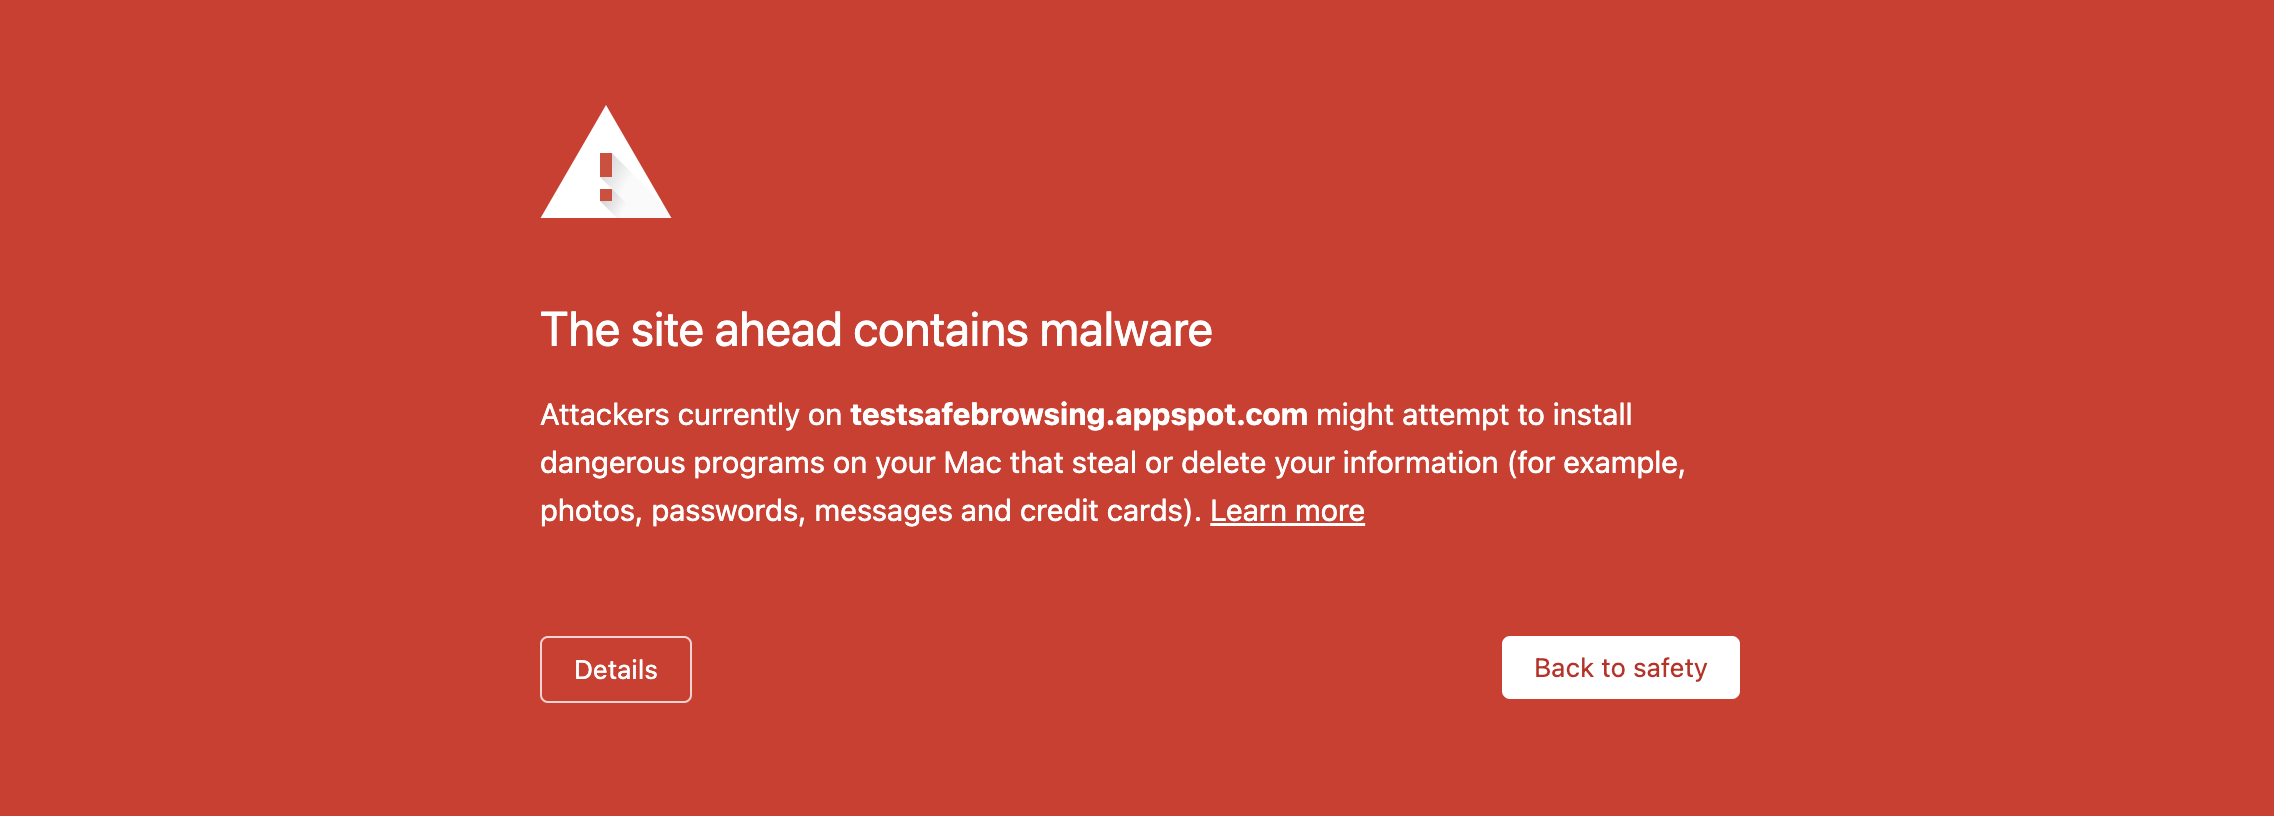 Safe Browsing warning for a site that contains malware